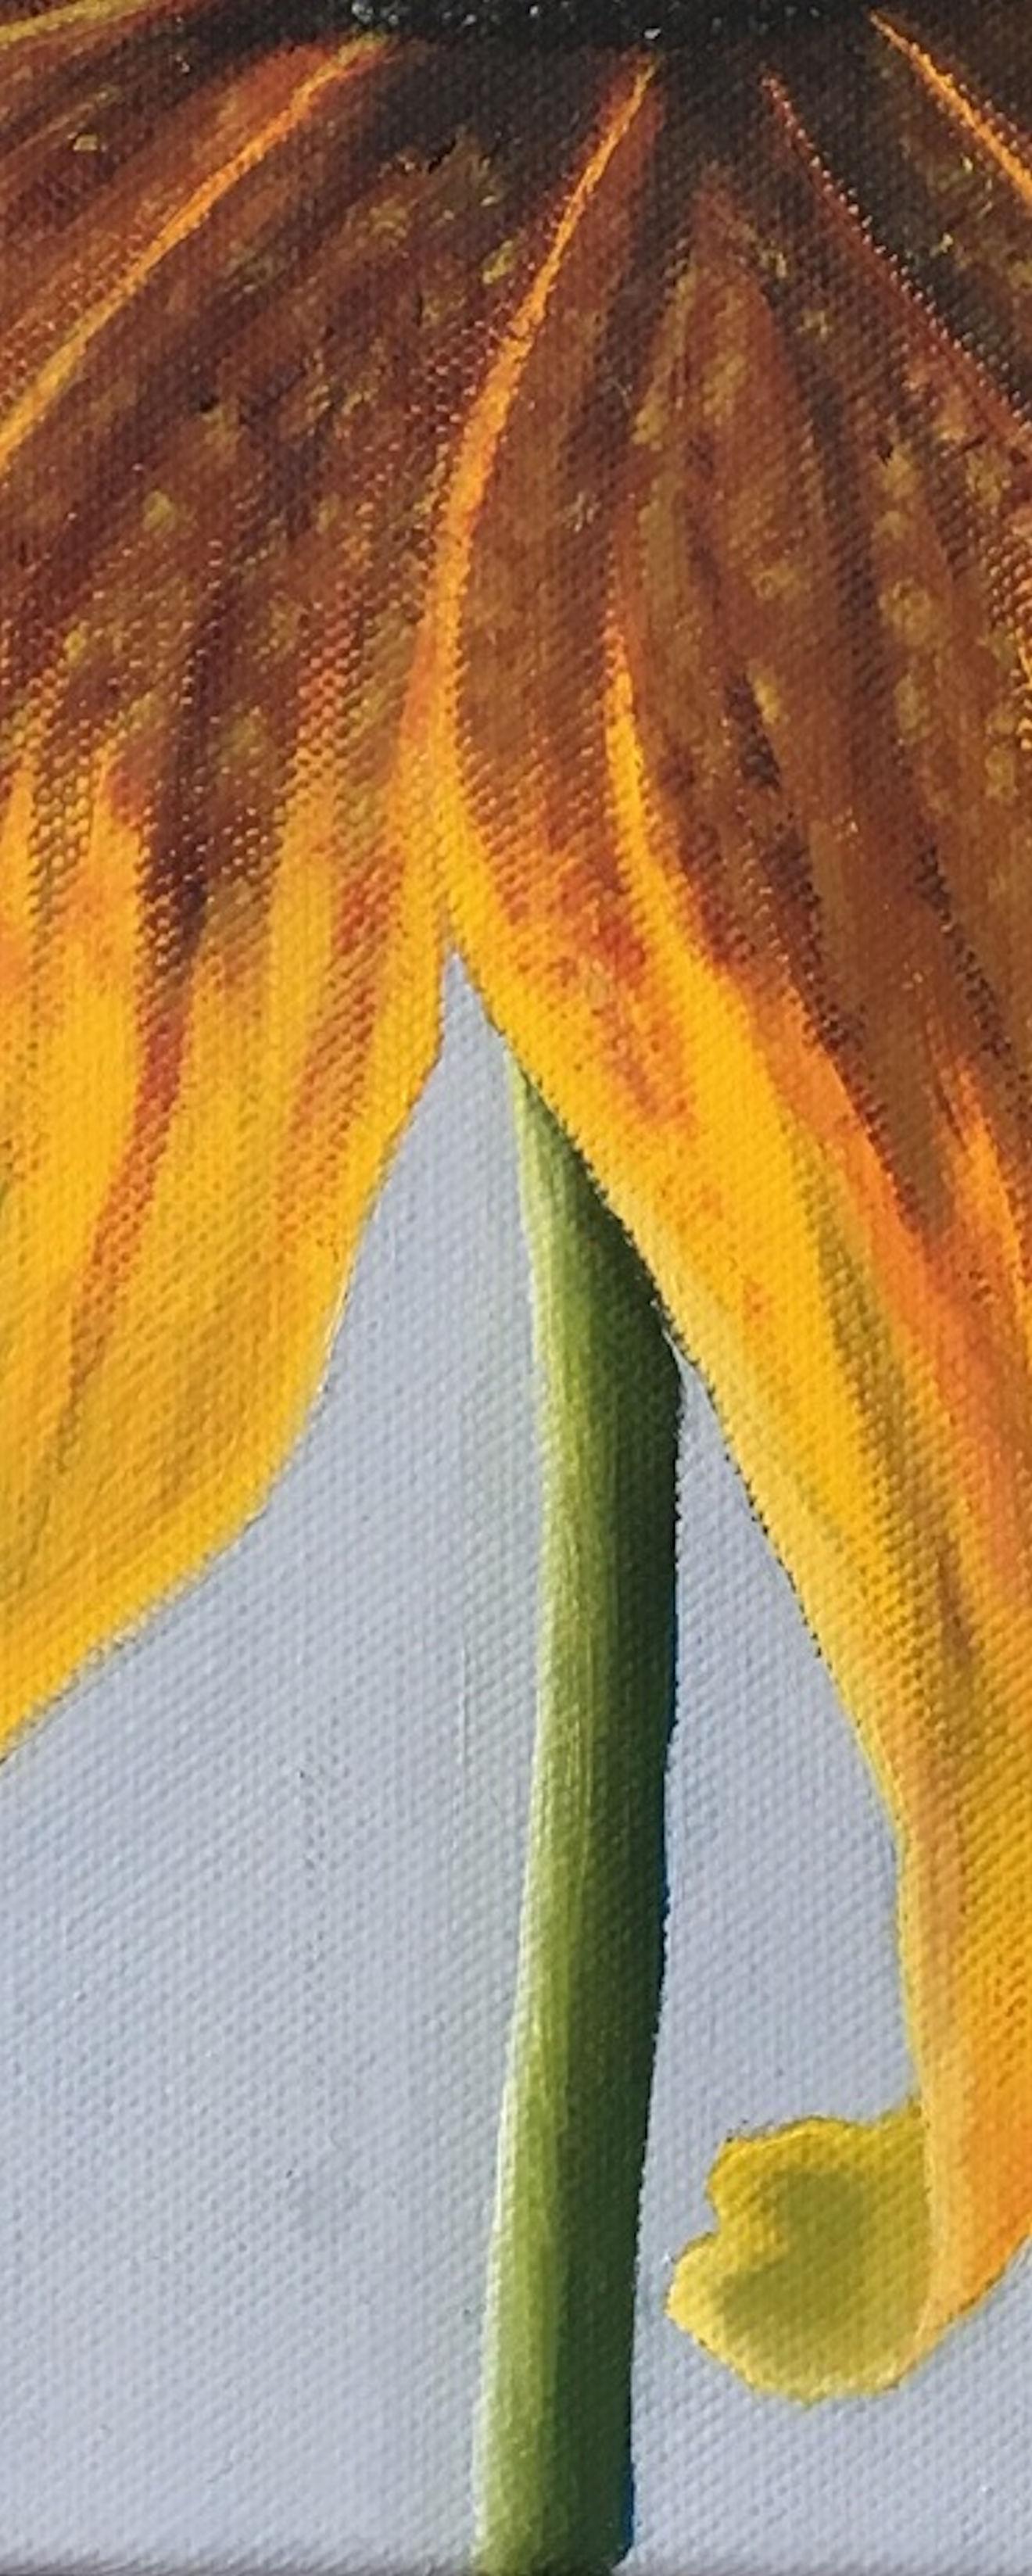 A close-up oil on canvas painting of a cutleaf coneflower.
It is one of four paintings of vividly colored and almost stylistic flowers.

About the artist:

Esther Hansen grew up in the countryside and now lives on a farm. She started her painting